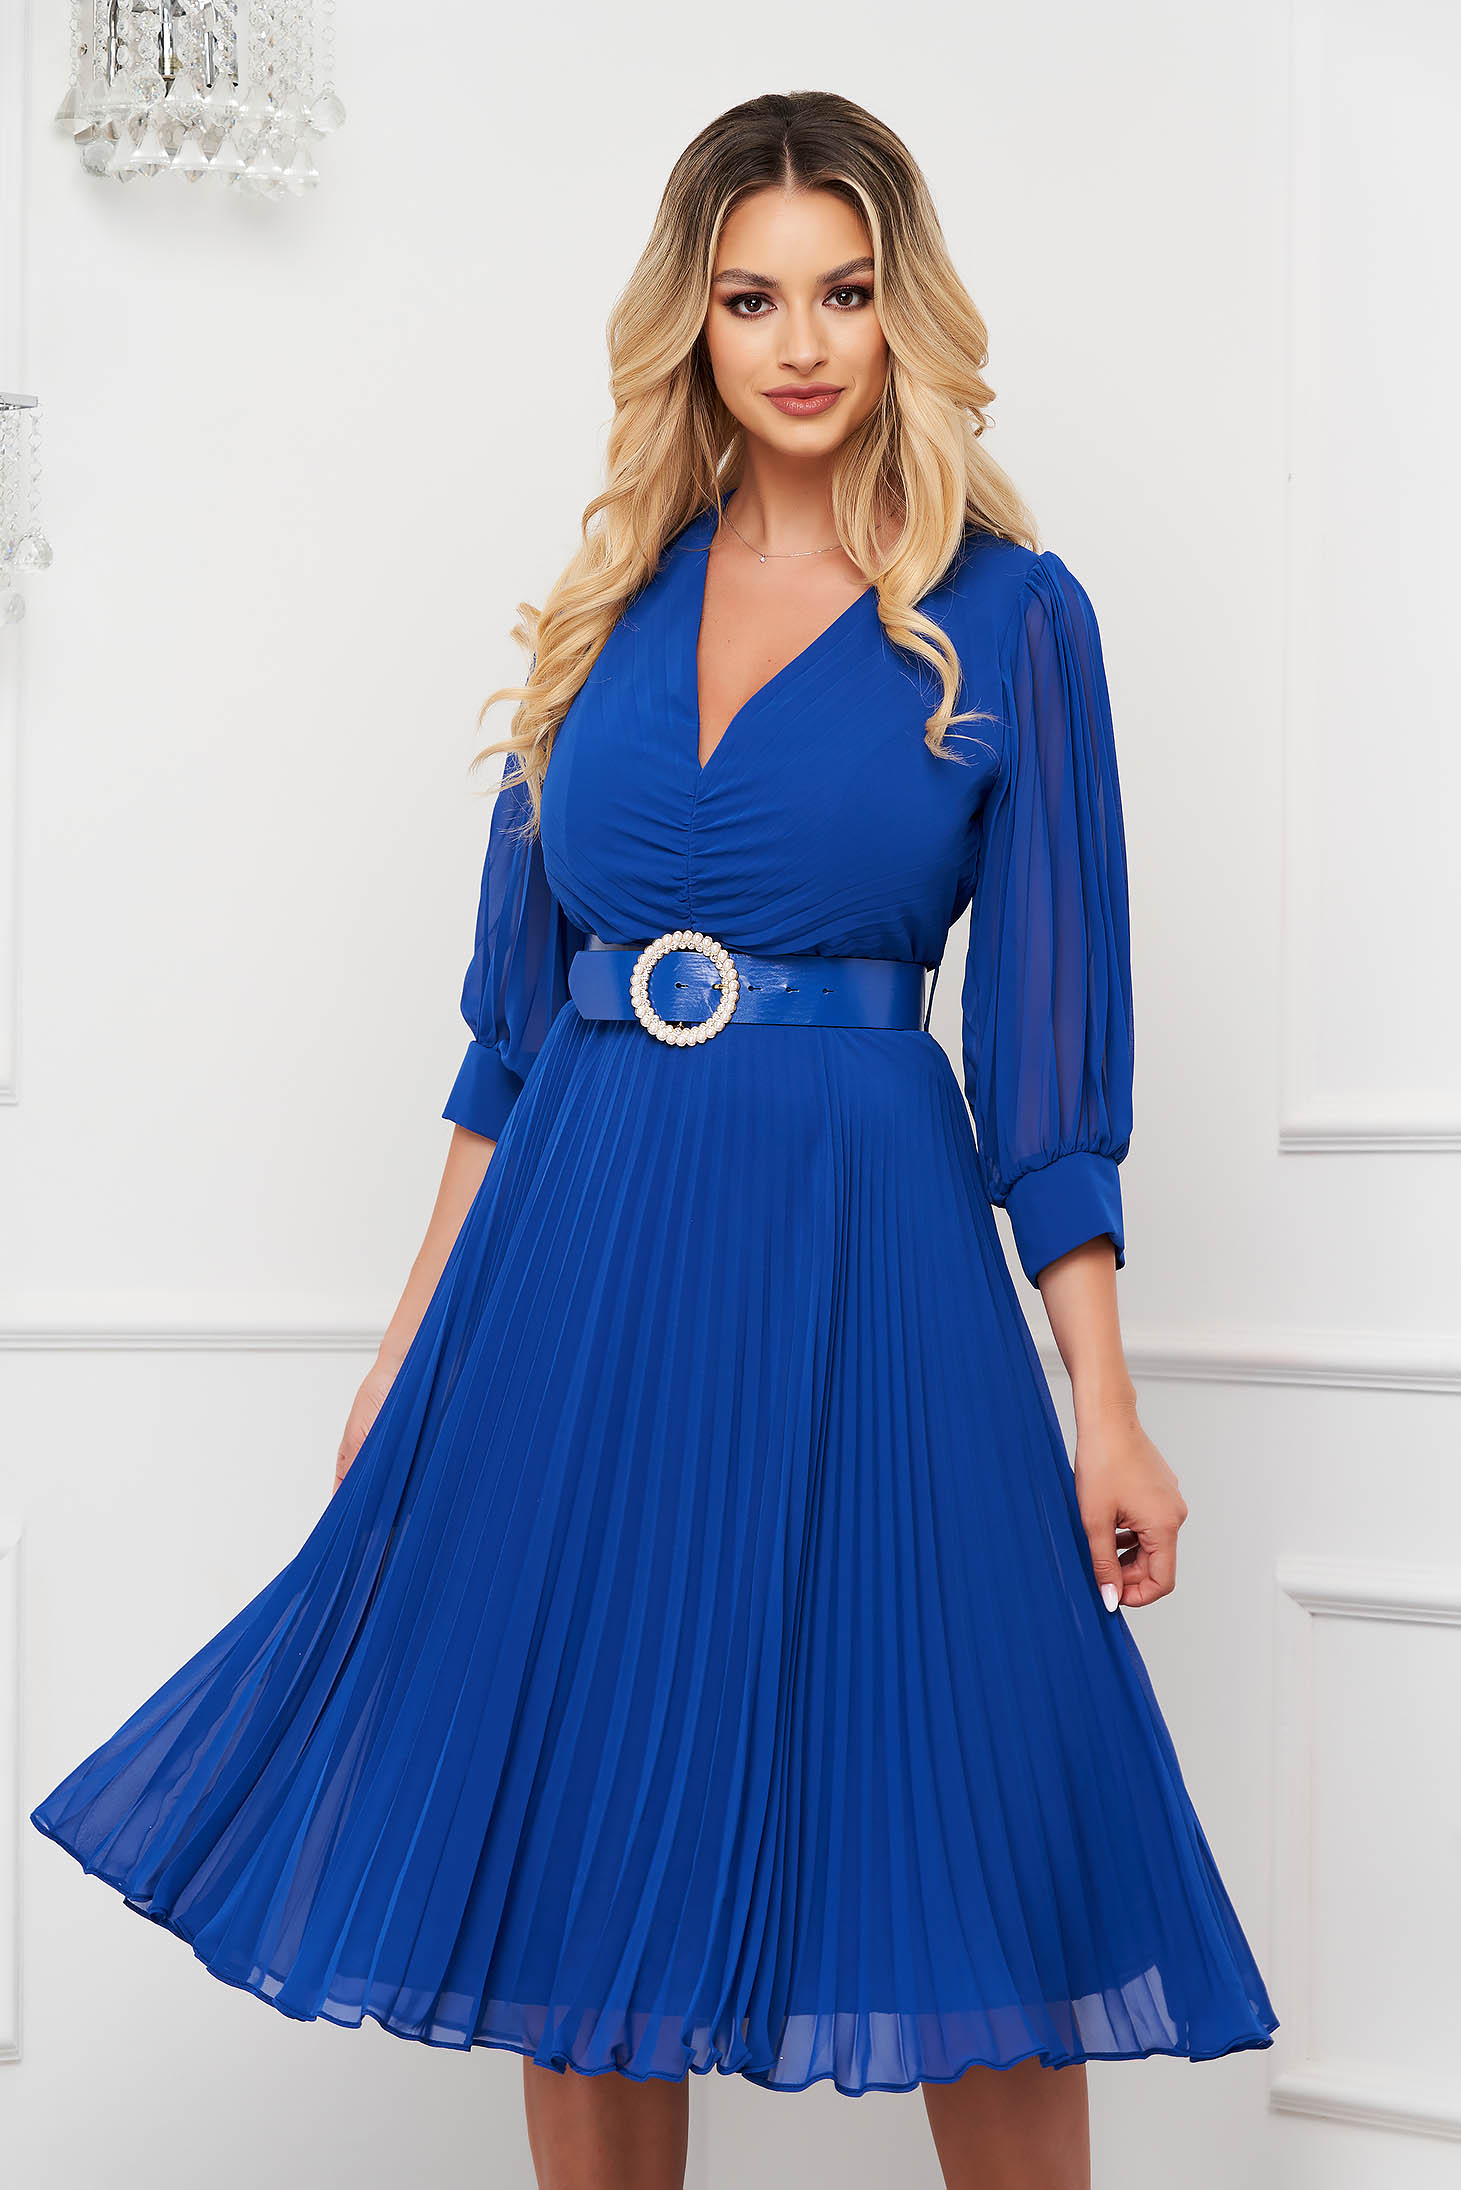 Blue dress pleated from veil fabric midi cloche accessorized with belt